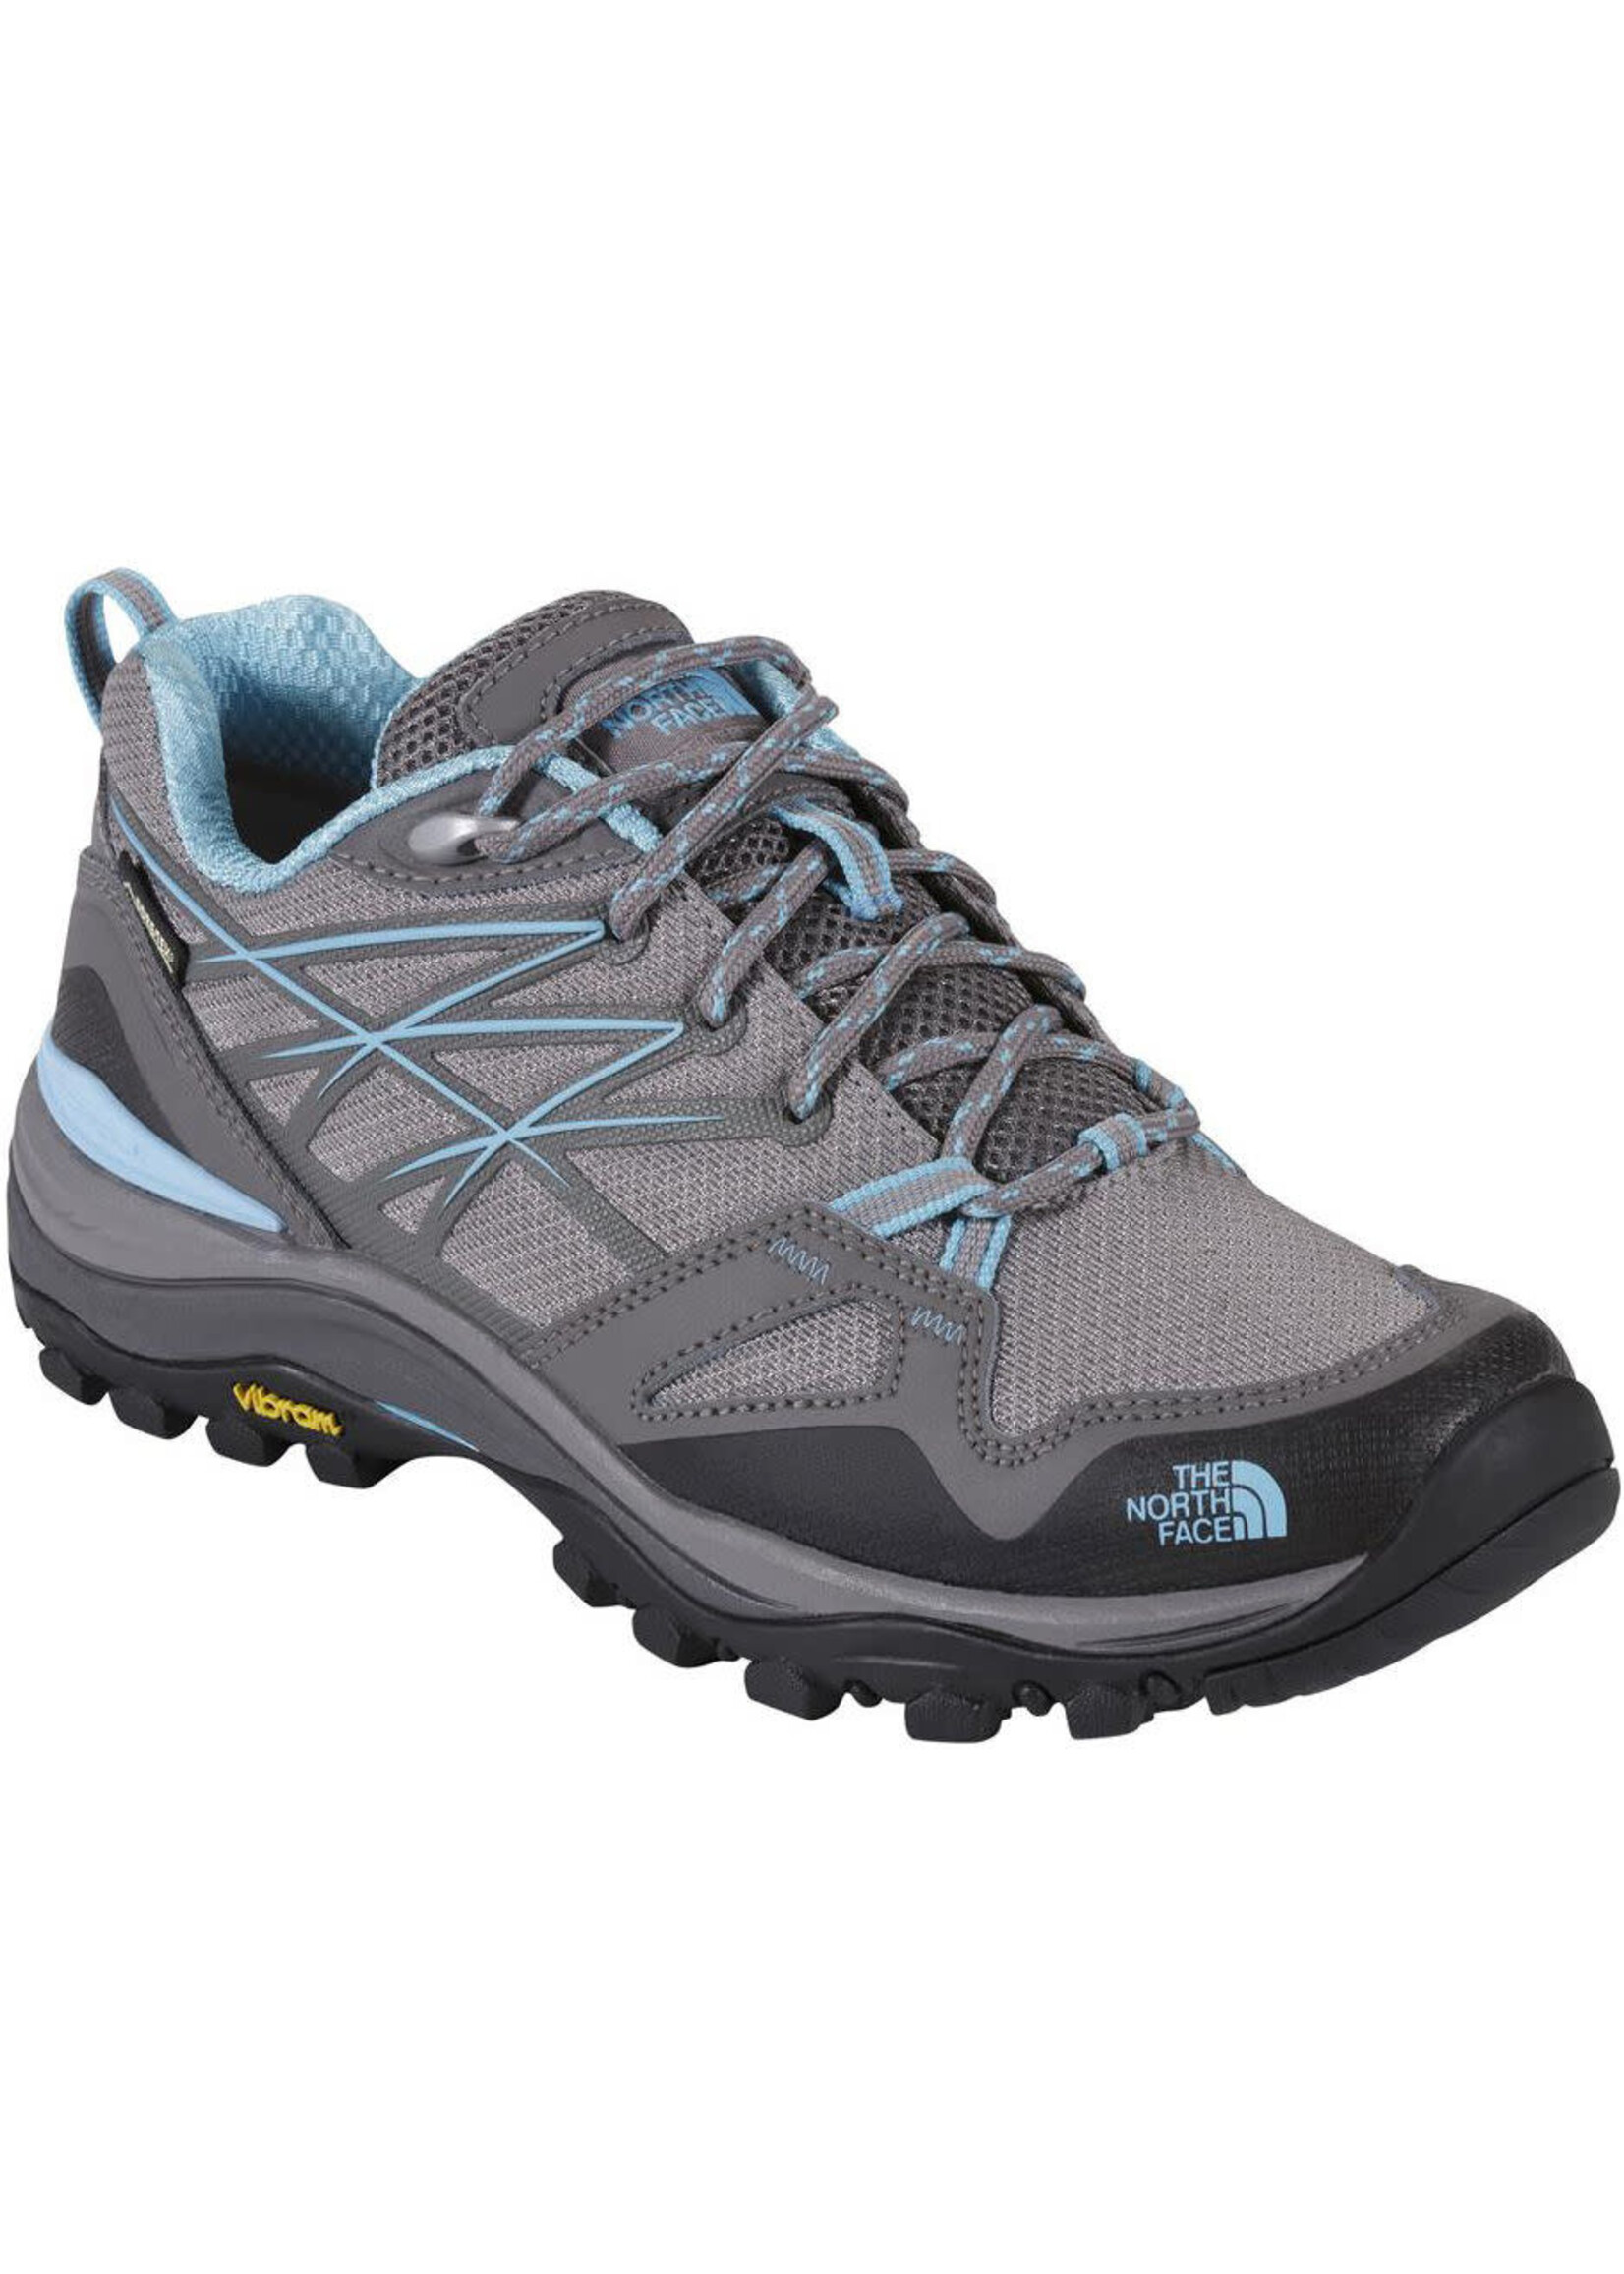 The North Face Hedgehog Fastpack Gore-Tex WOMEN'S